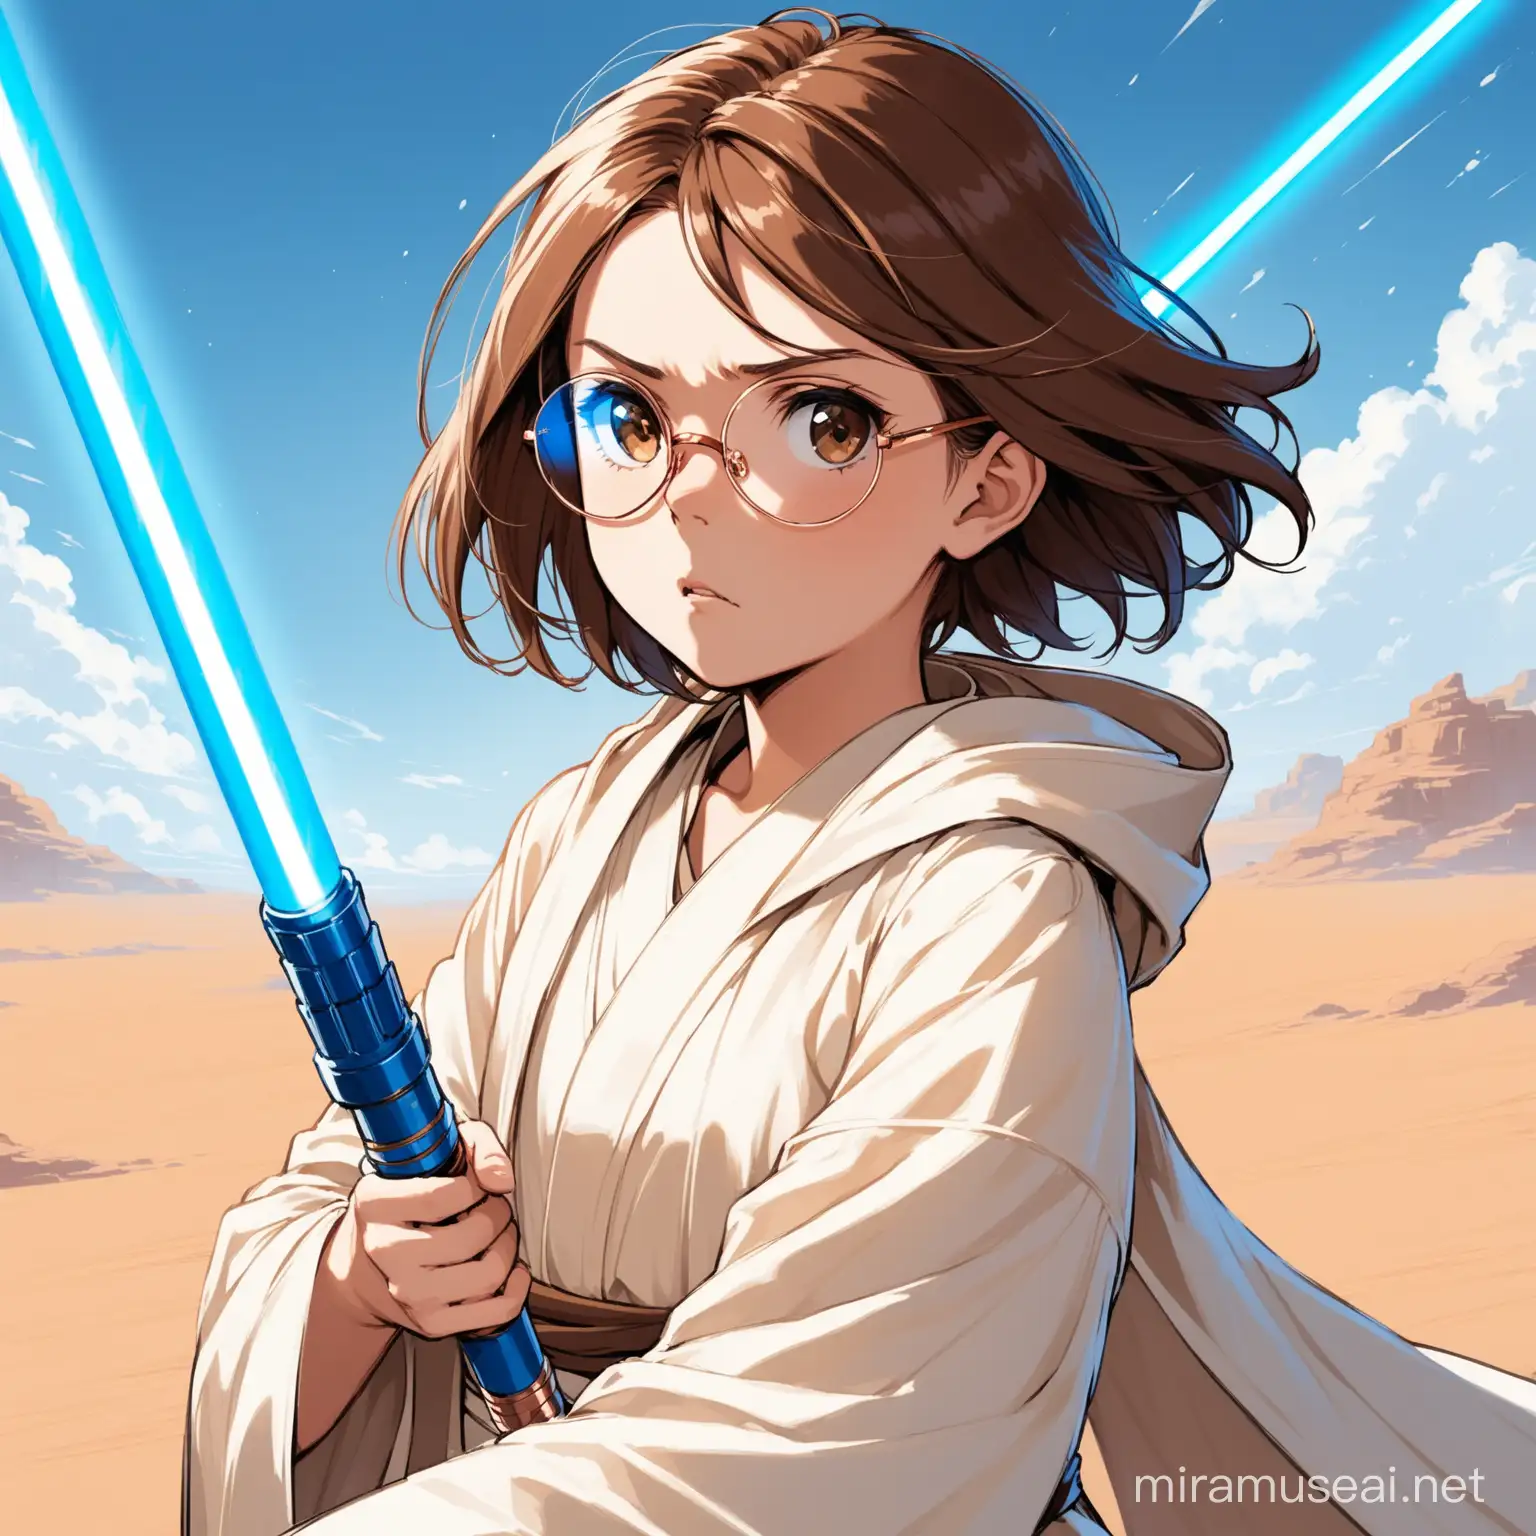 Determined Jedi Girl with Blue Lightsaber in White Robes